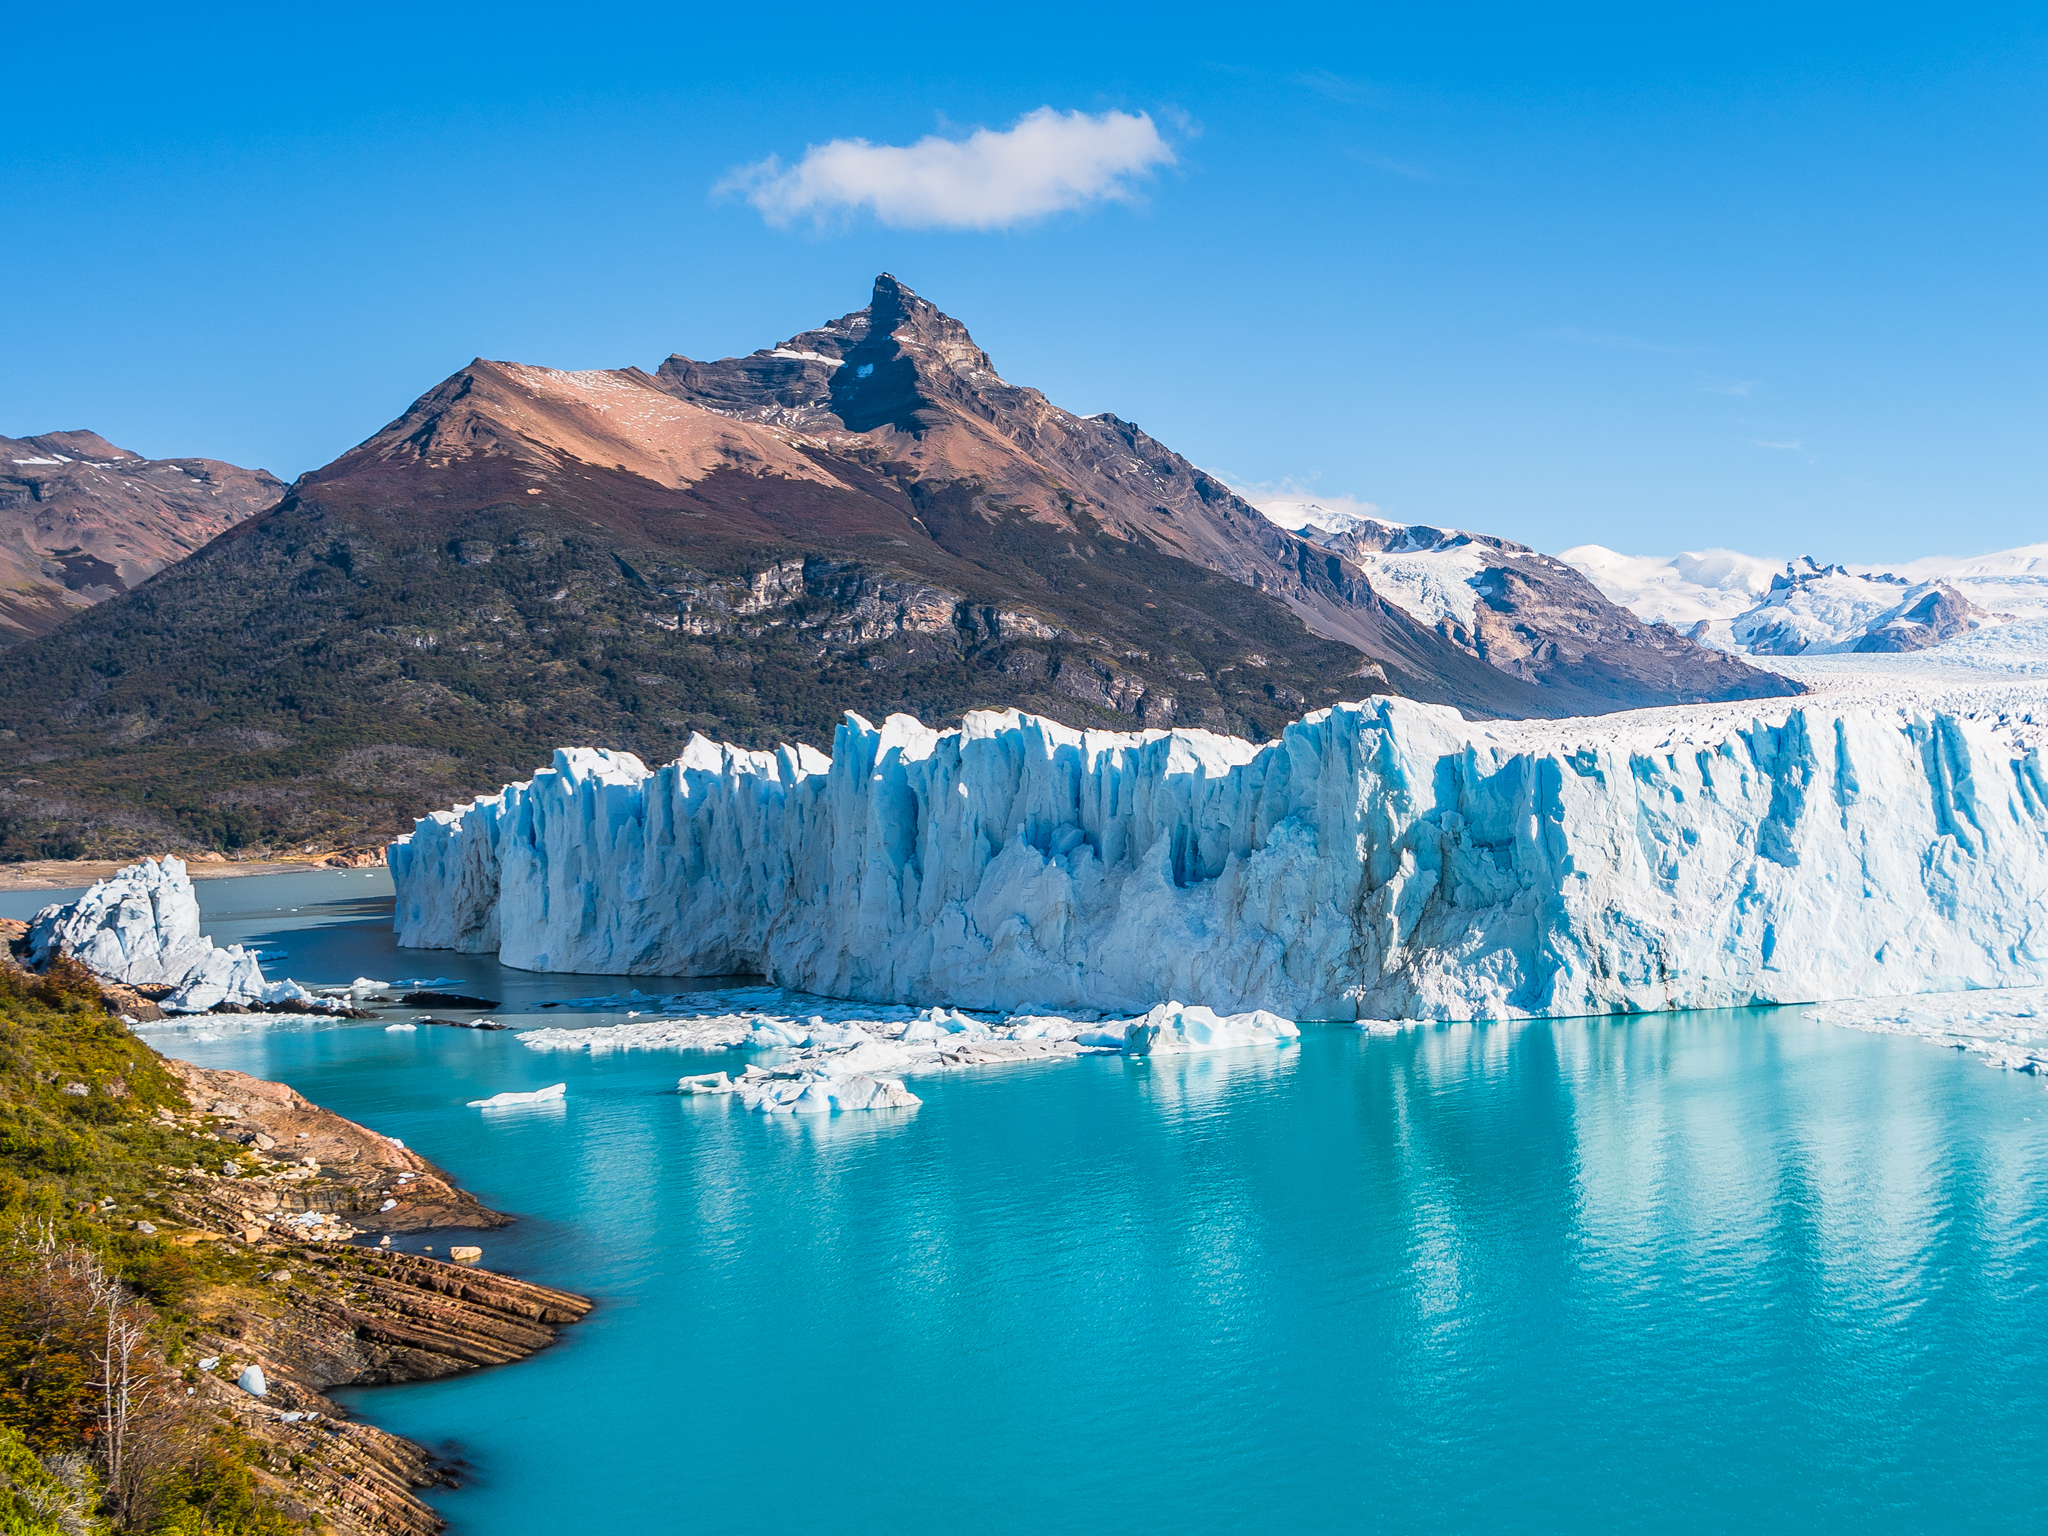 The country has a lot to offer for nature lovers, from Patagonia’s glacier to Salta’s Salinas Grandes